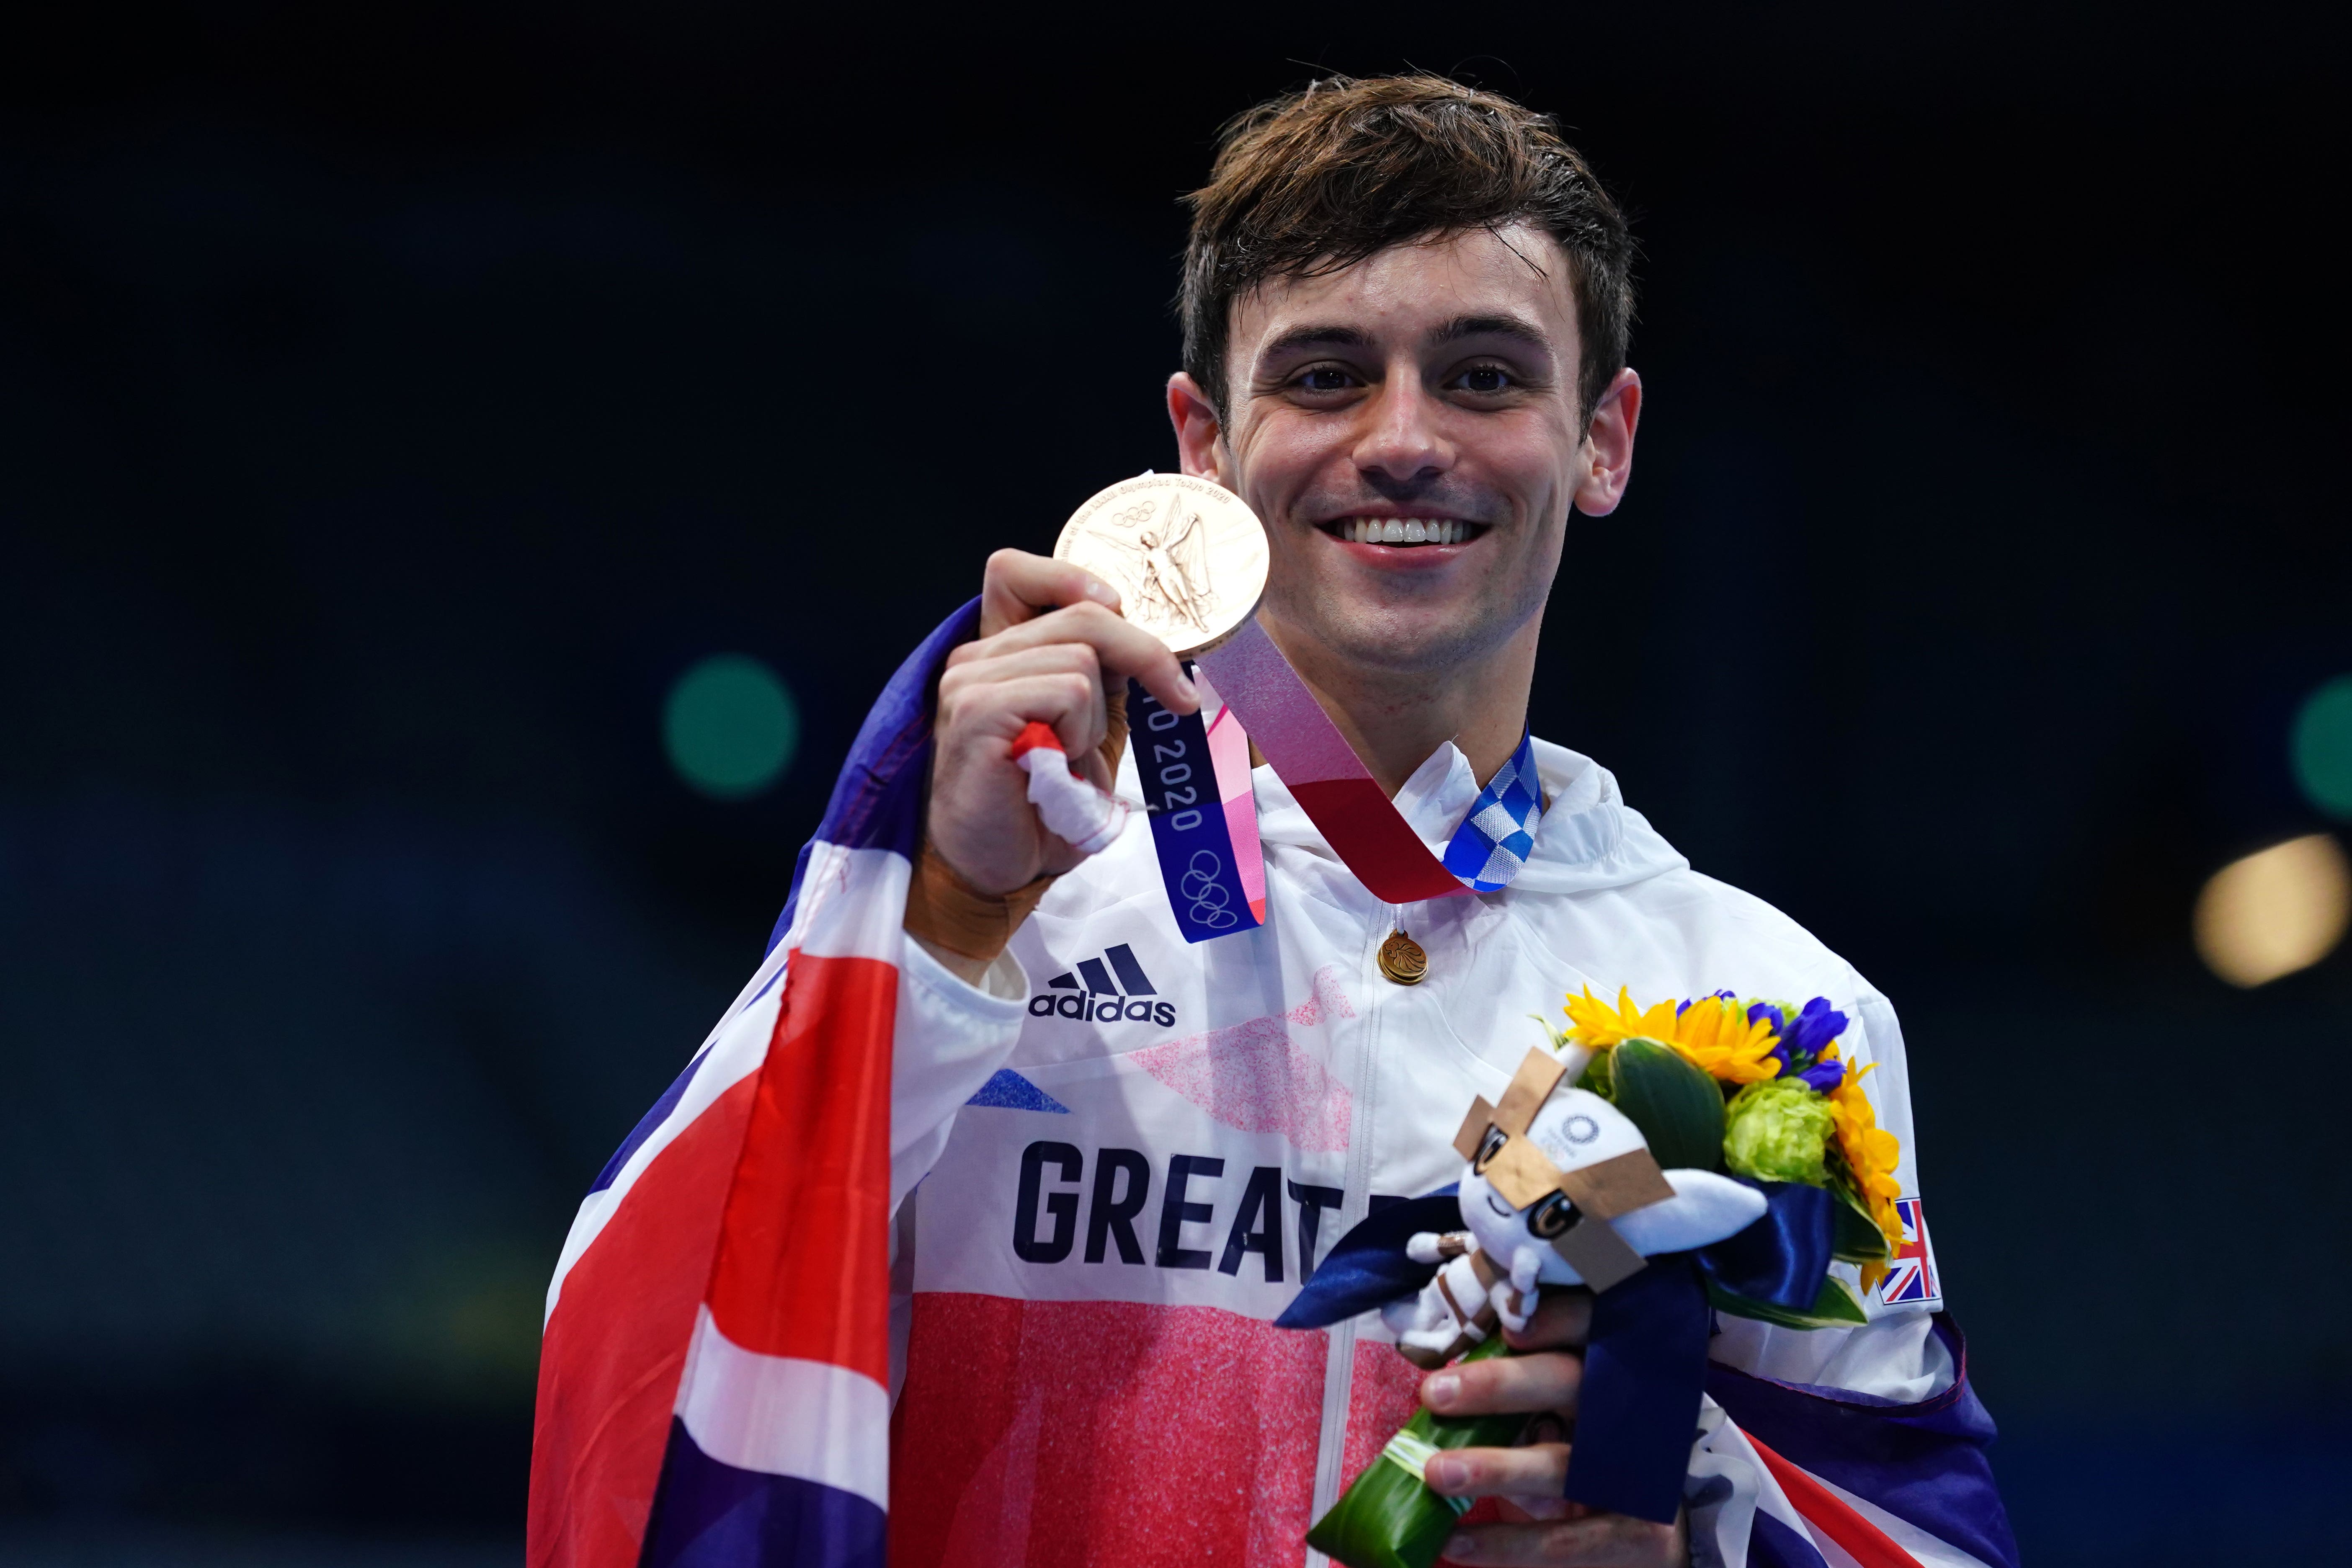 Tom Daley took two years out from the sport after Tokyo 2020